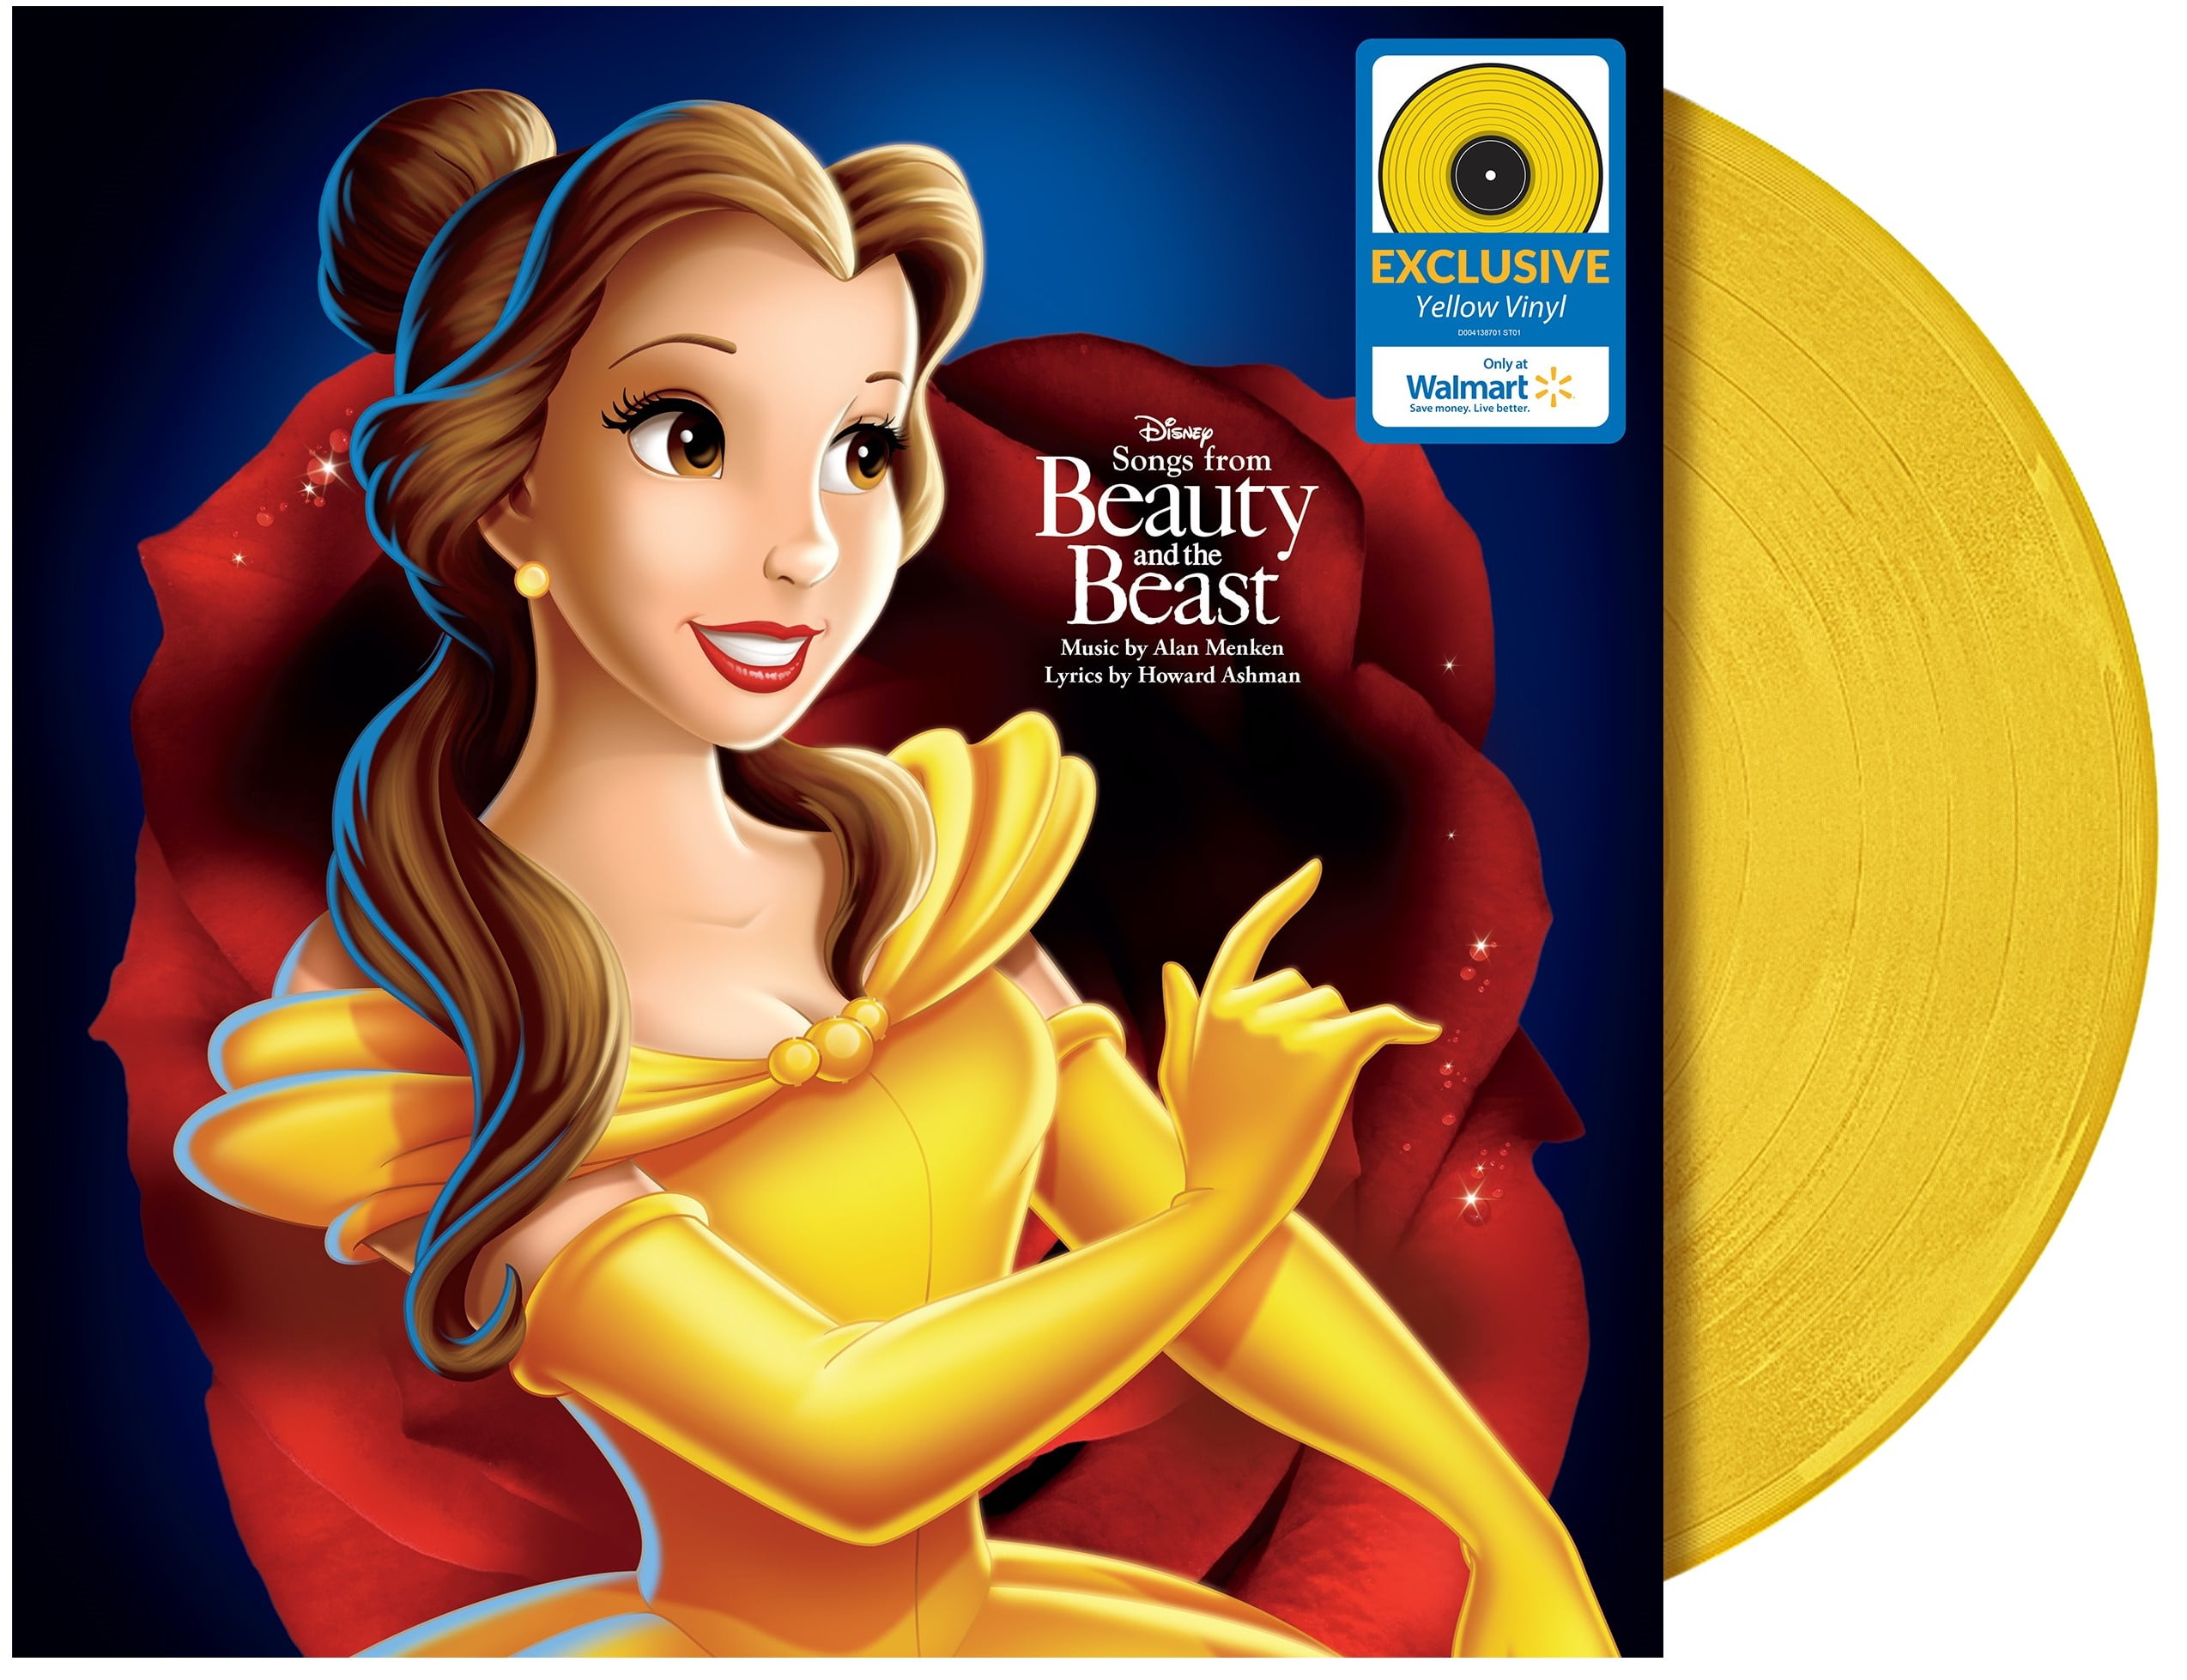 Songs from Beauty and the Beast (Walmart Exclusive Yellow Vinyl